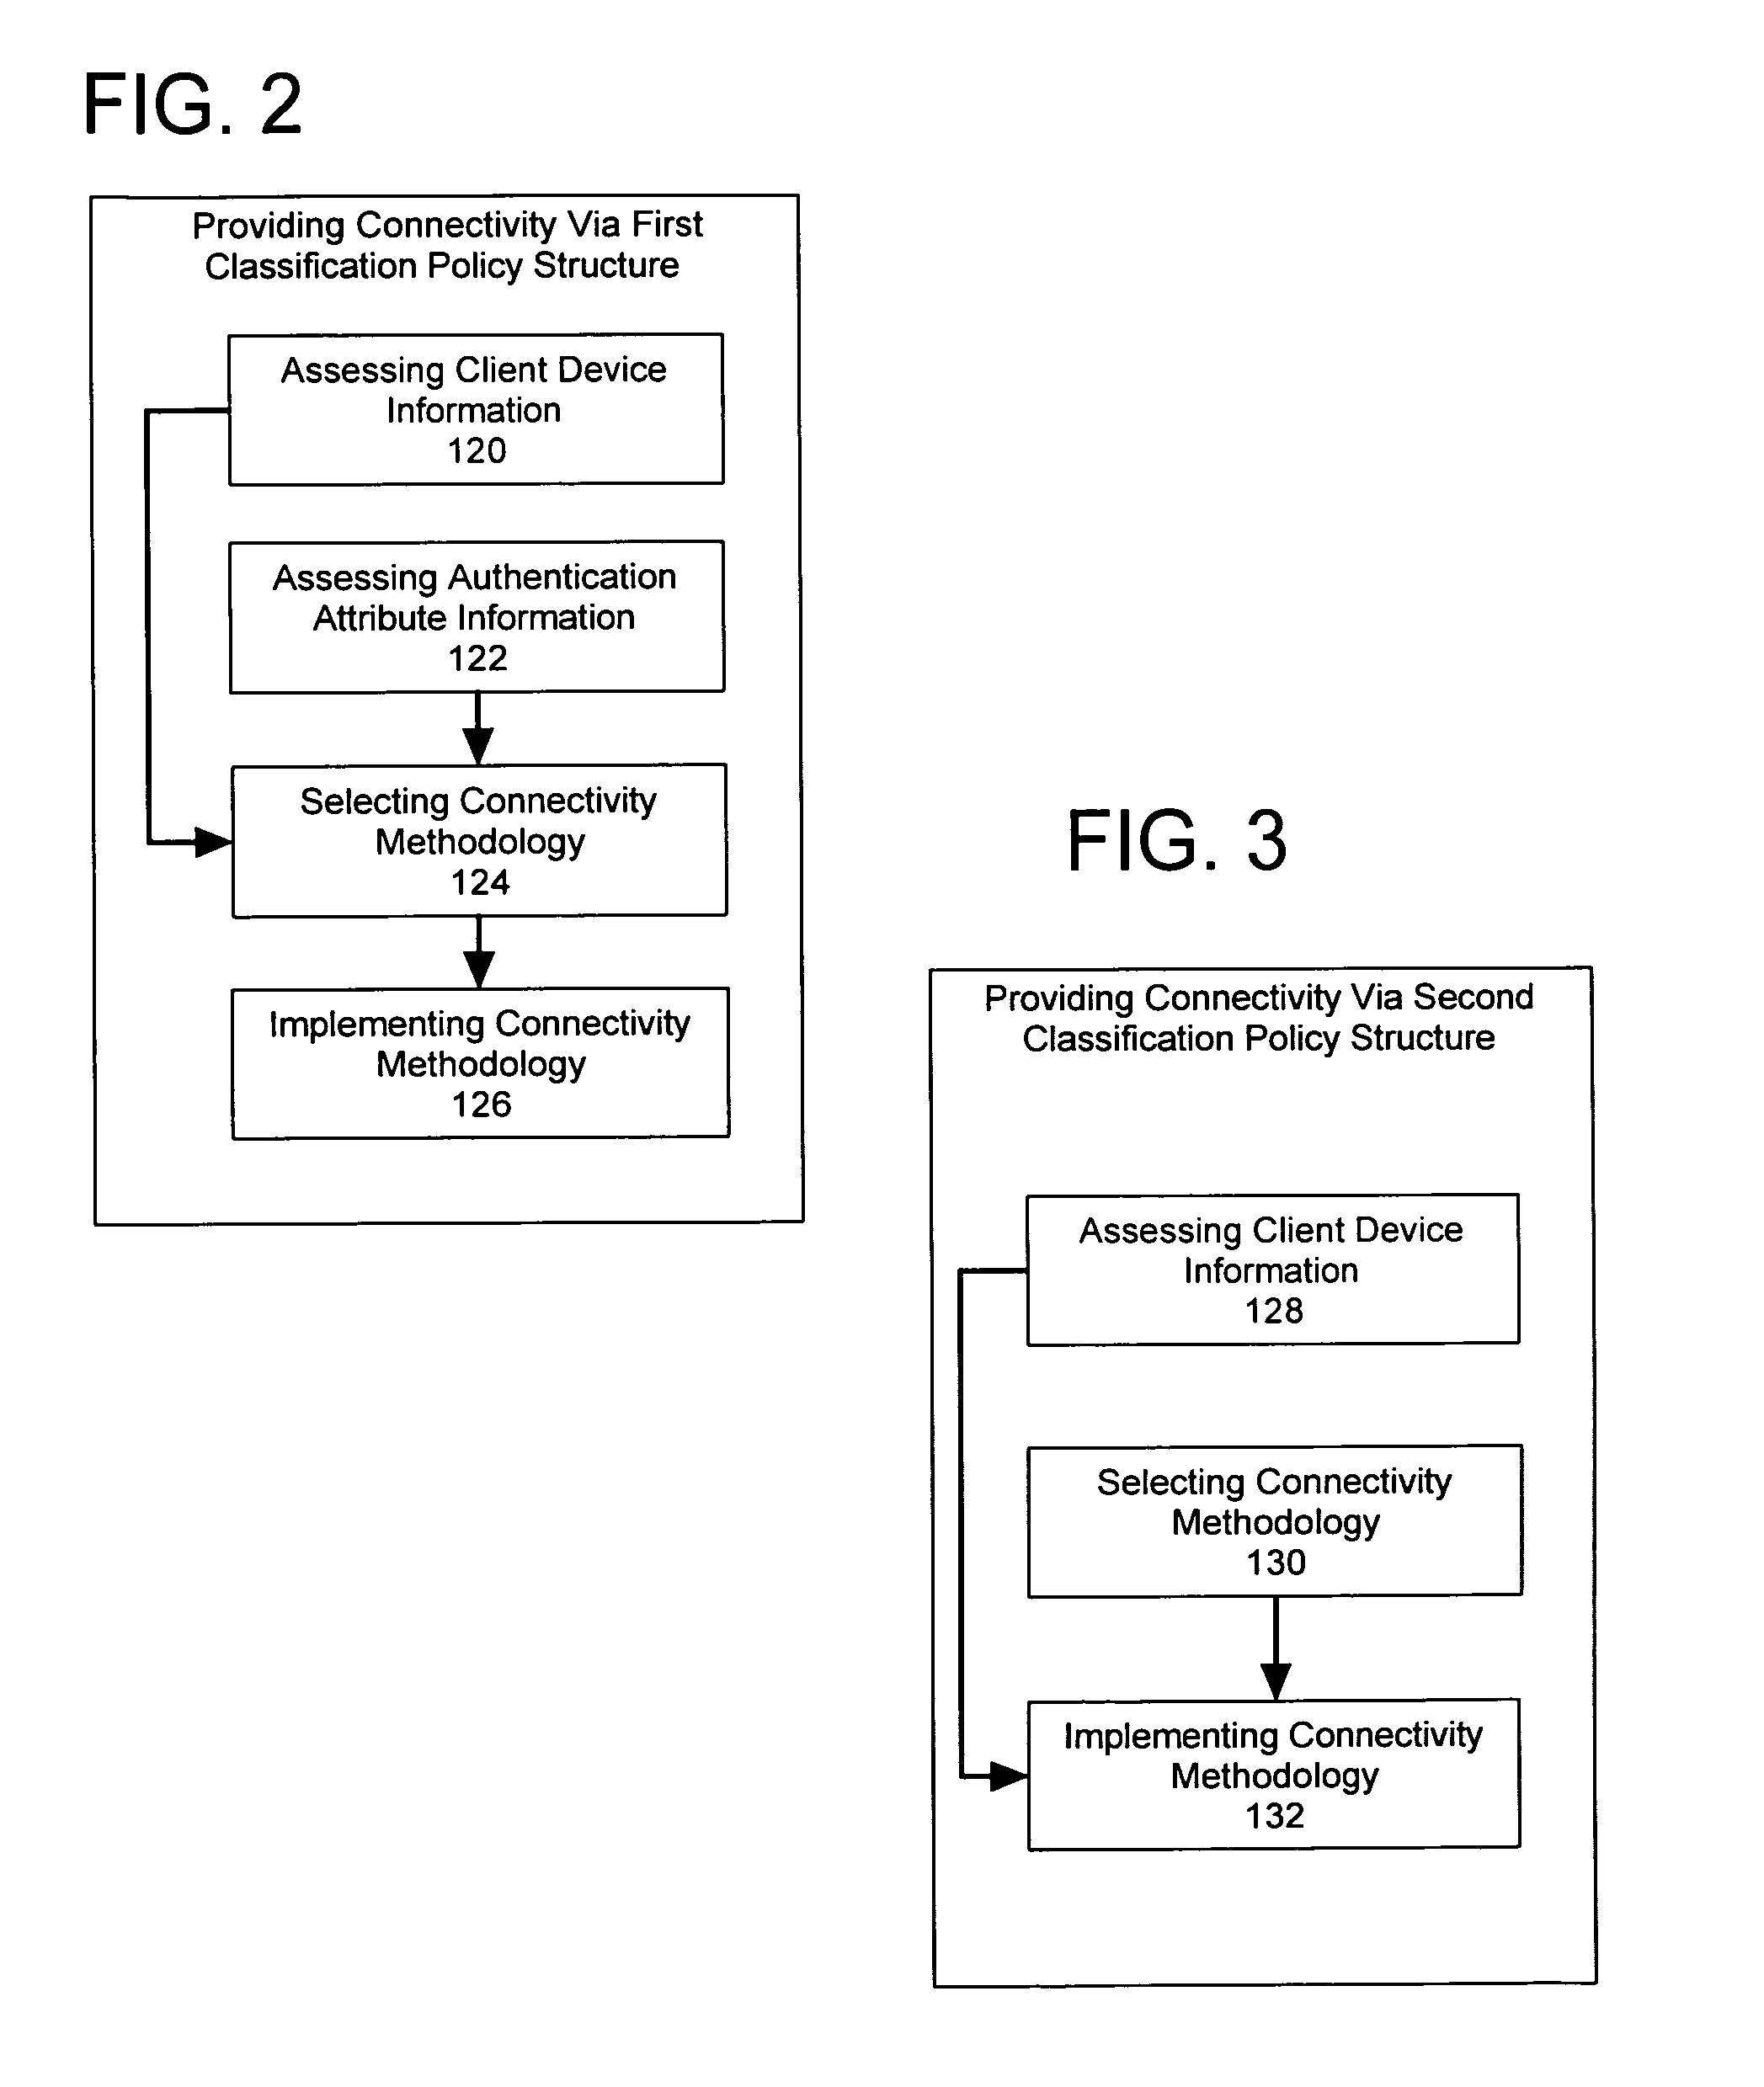 Facilitating heterogeneous authentication for allowing network access